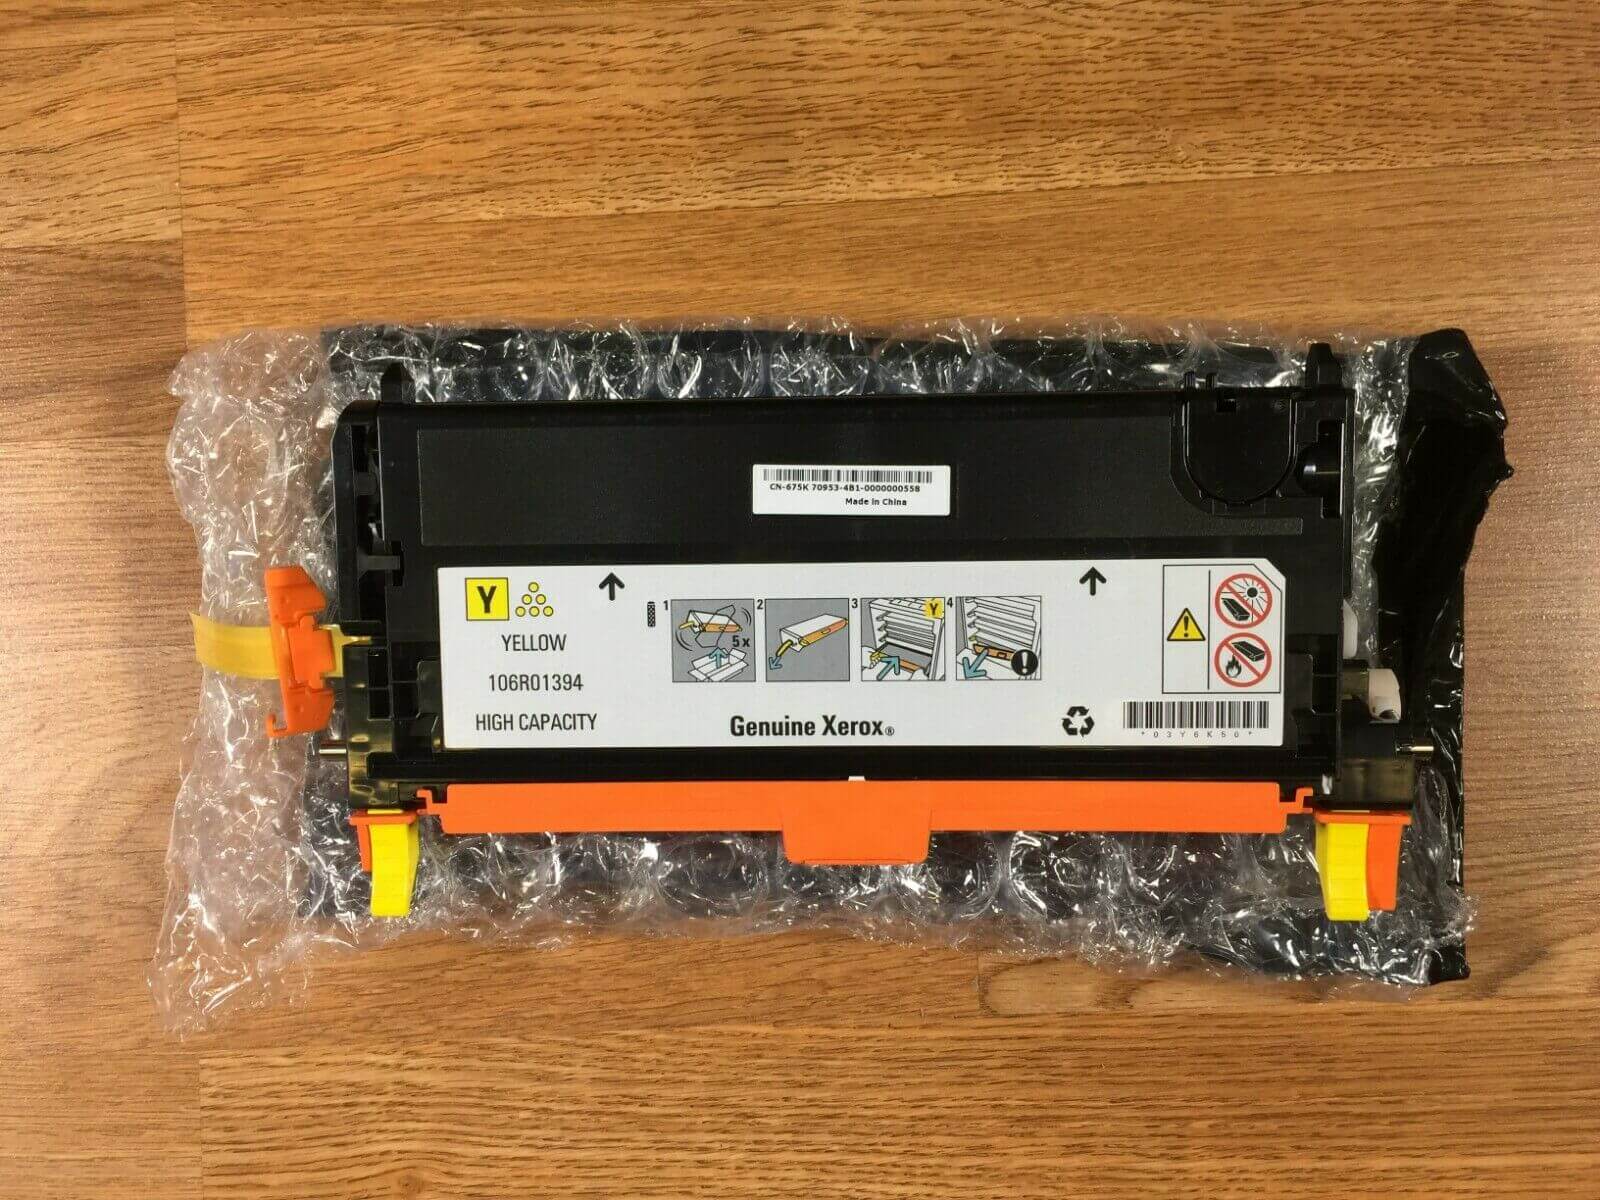 Genuine Xerox Phaser 6280 Yellow Toner 106R01394 - FedEx 2Day Air!! - copier-clearance-center